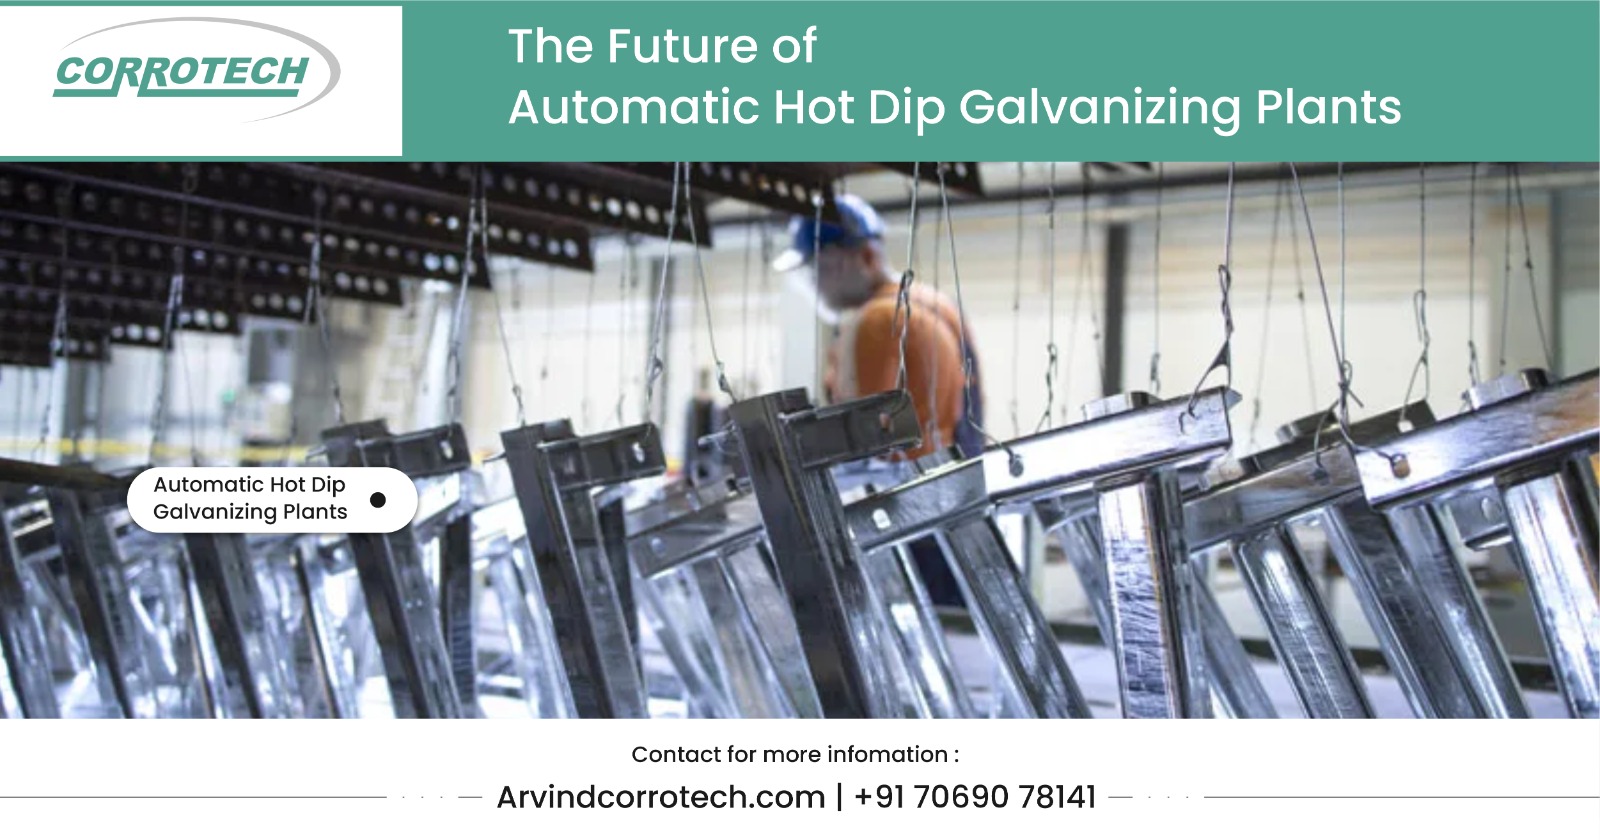 The Future of Automatic Hot Dip Galvanizing Plants